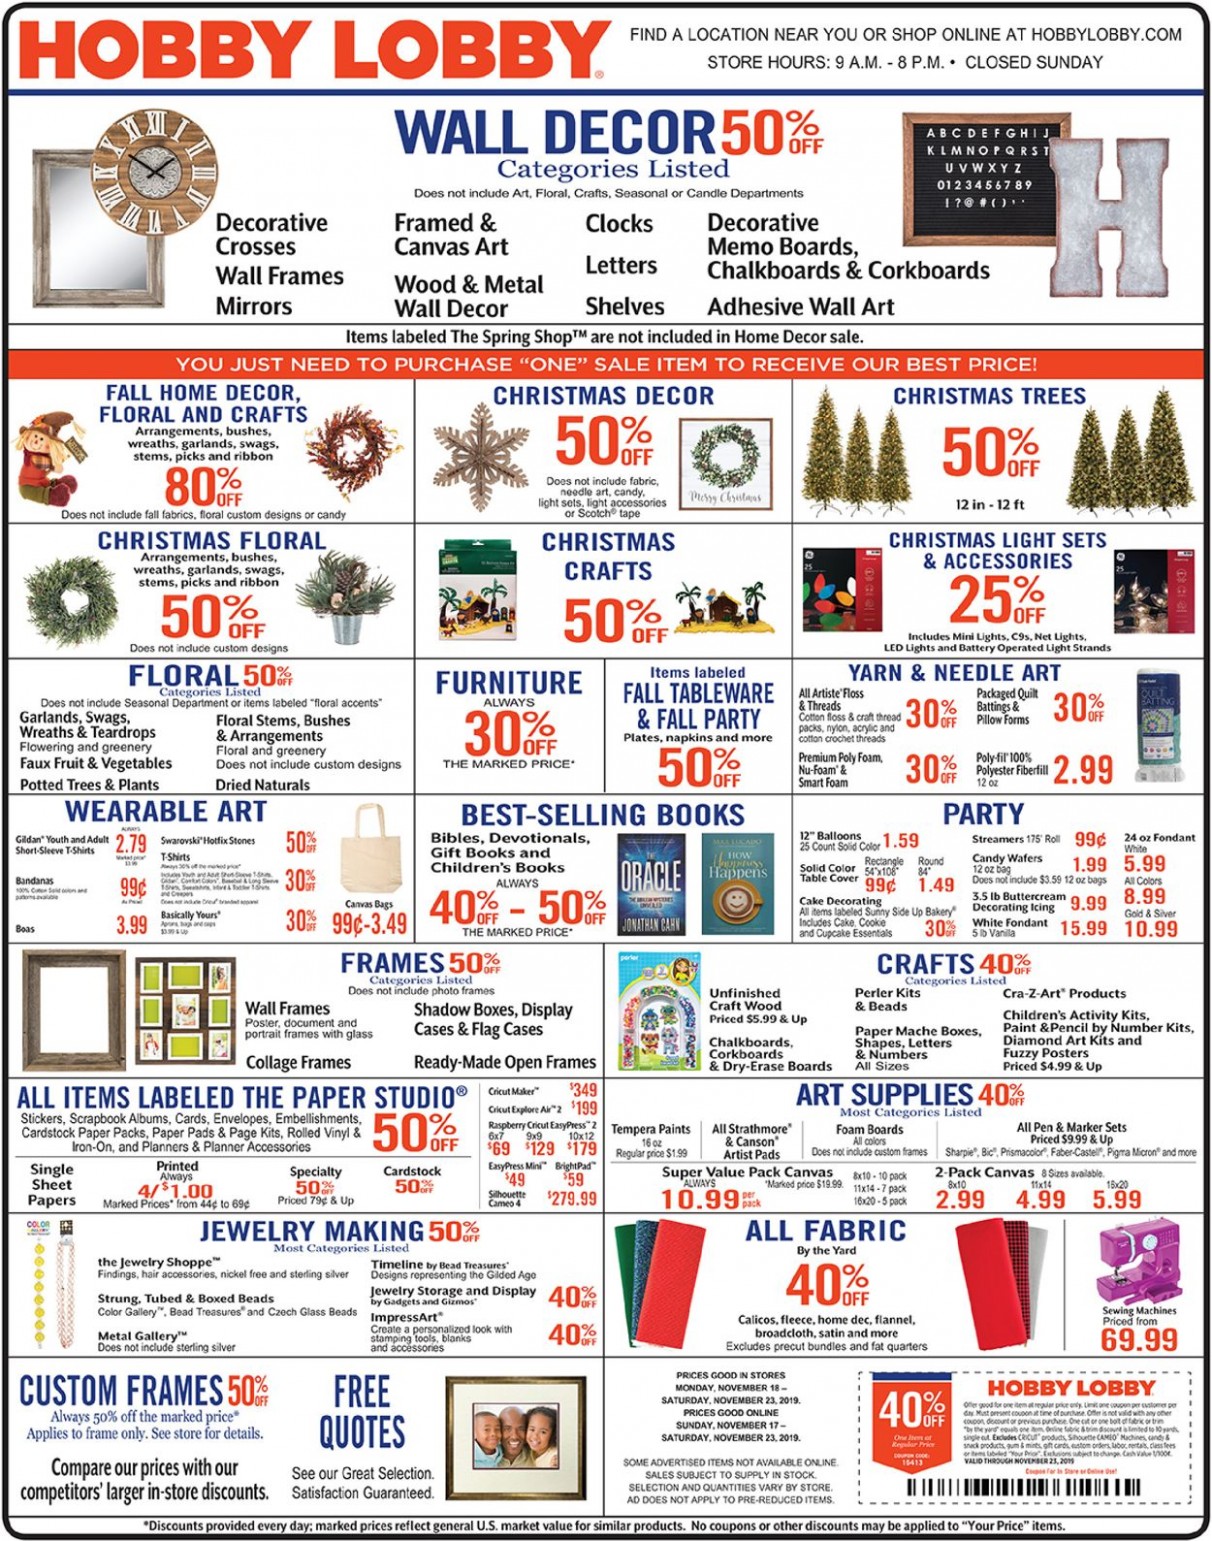 Hobby Lobby Current Weekly Ad 9/9 9/9/9 Frequent Ads